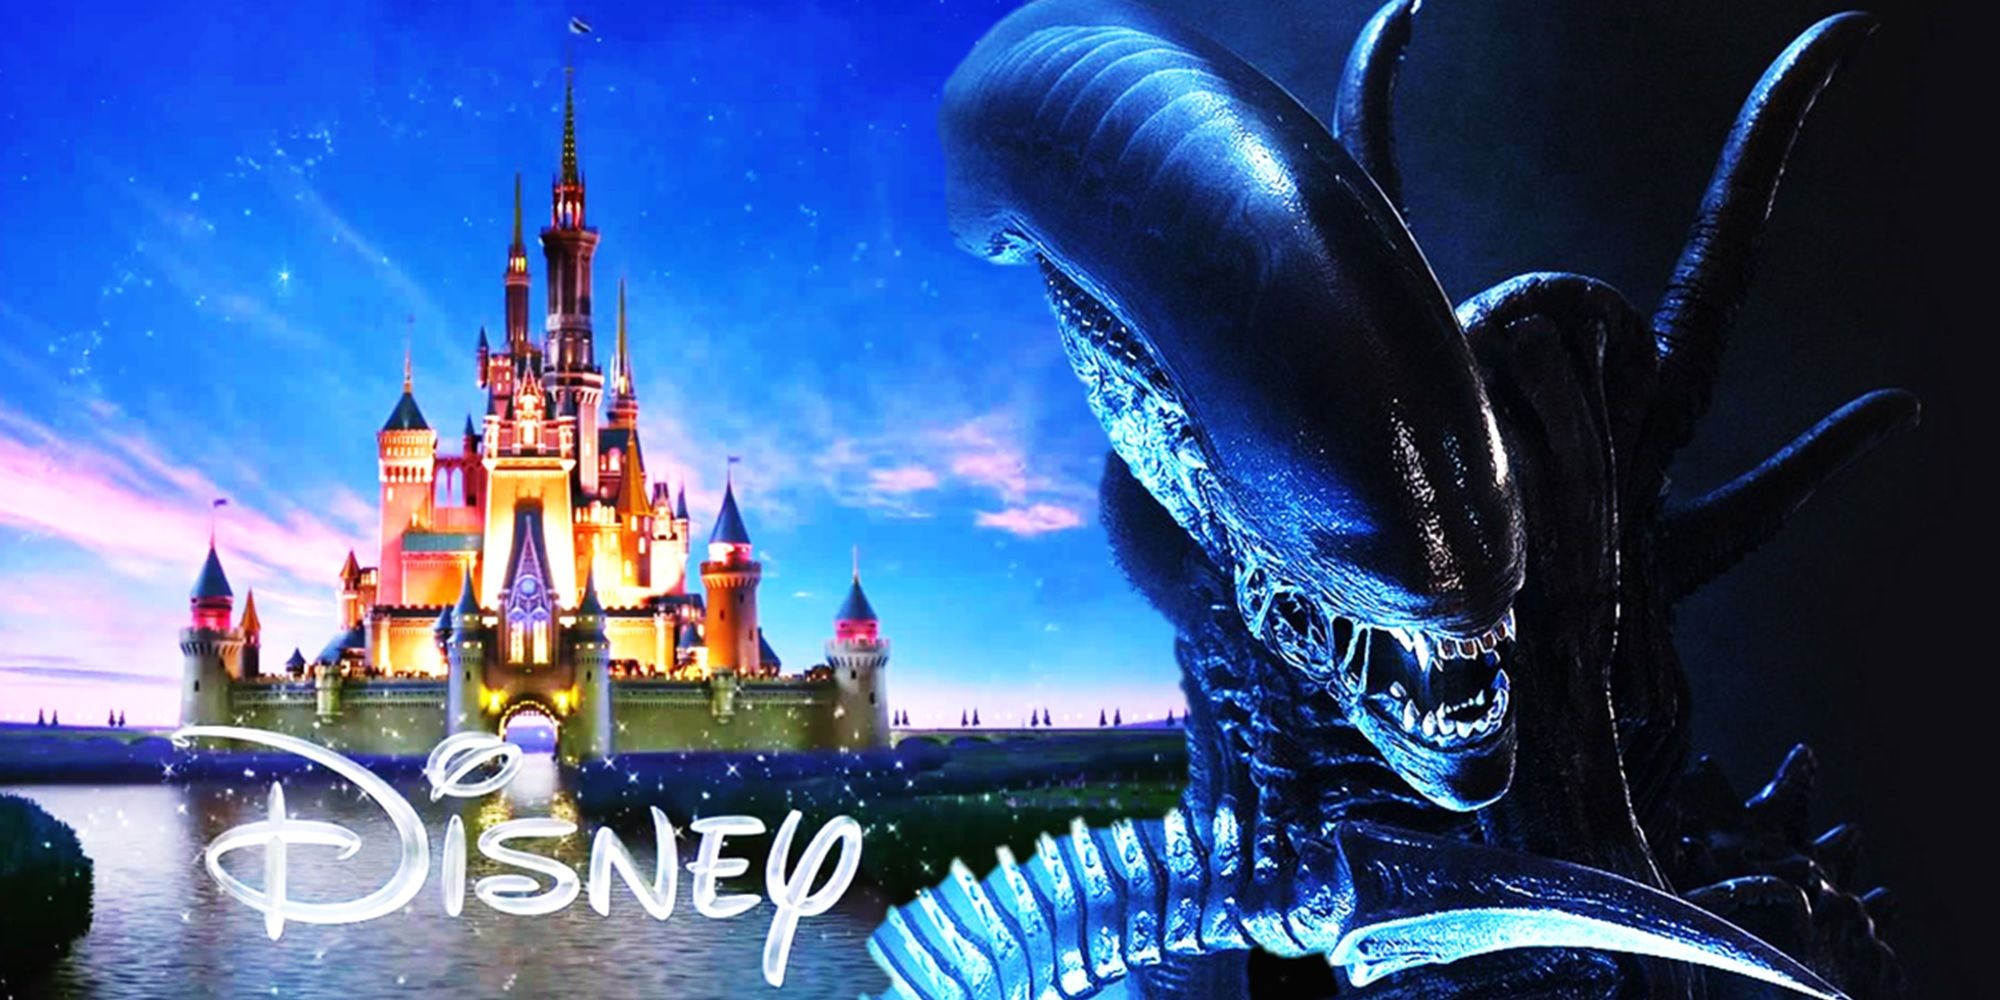 Collage of a xenomorph from Alien and the Disney logo